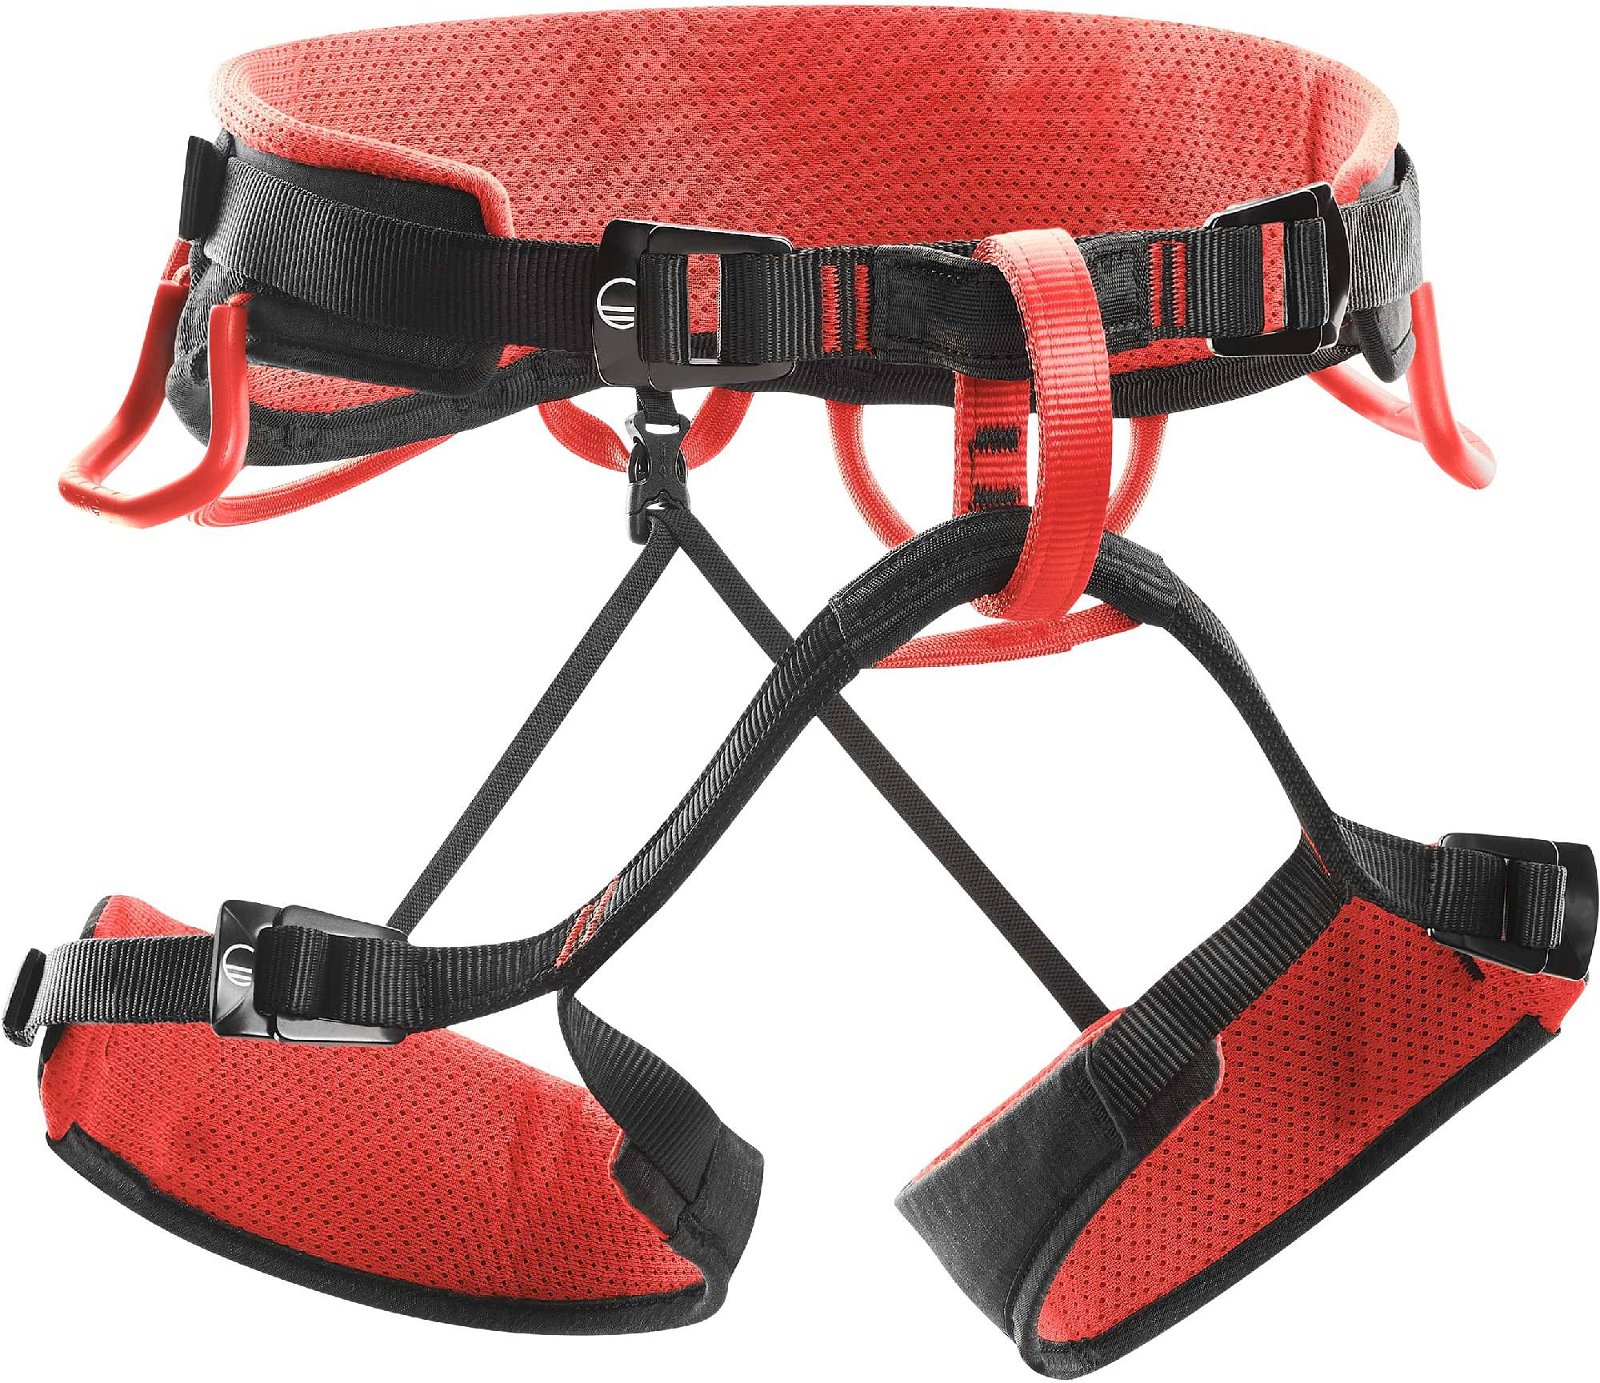 Wild Country Syncro harness